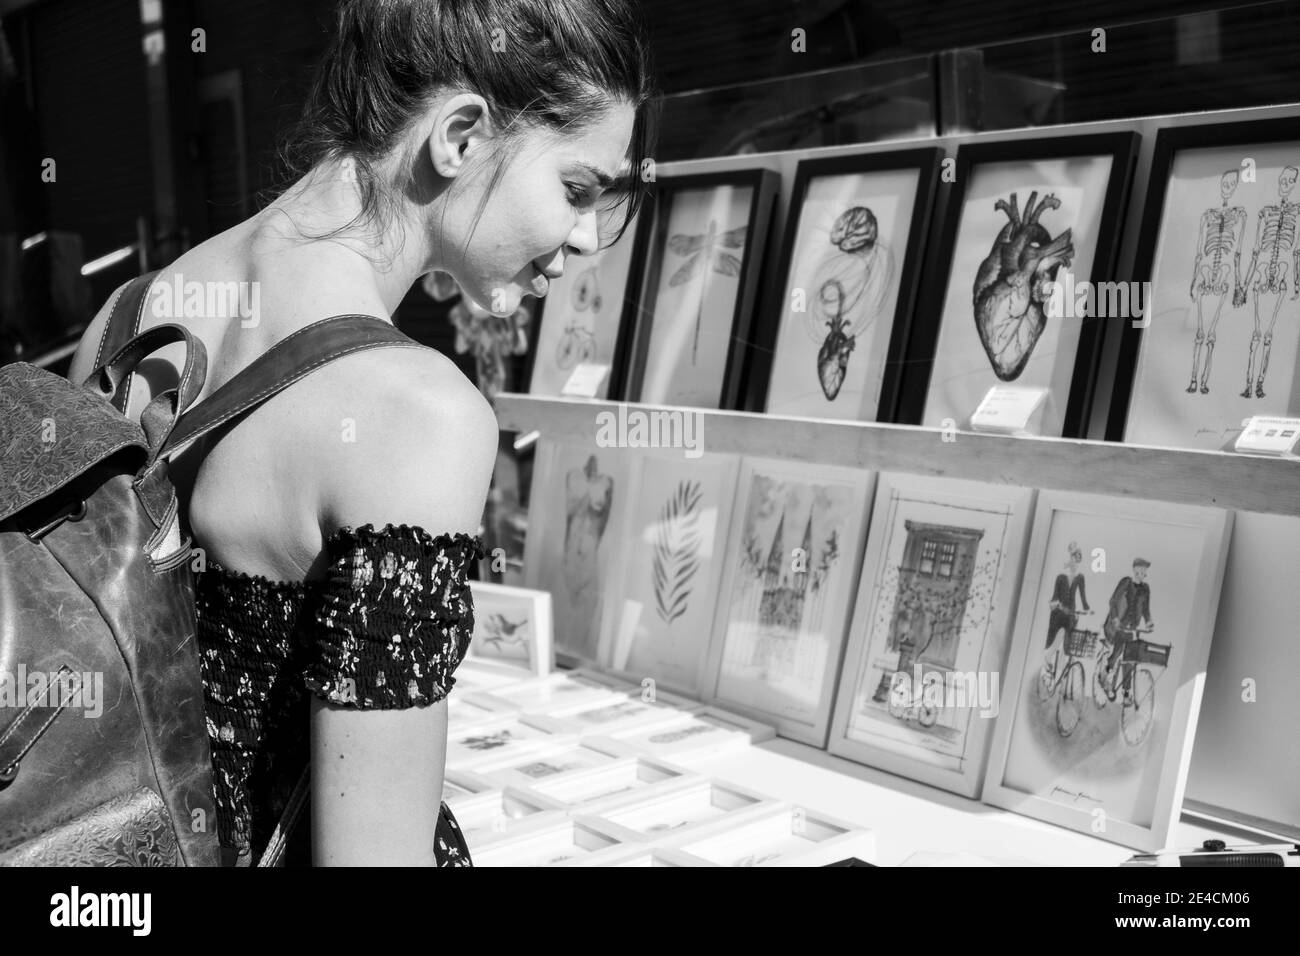 São Paulo / São Paulo / Brazil - 08 19 2018: Pretty young model woman choosing a drawing or a painting to buy at a street [Black and White version] Stock Photo